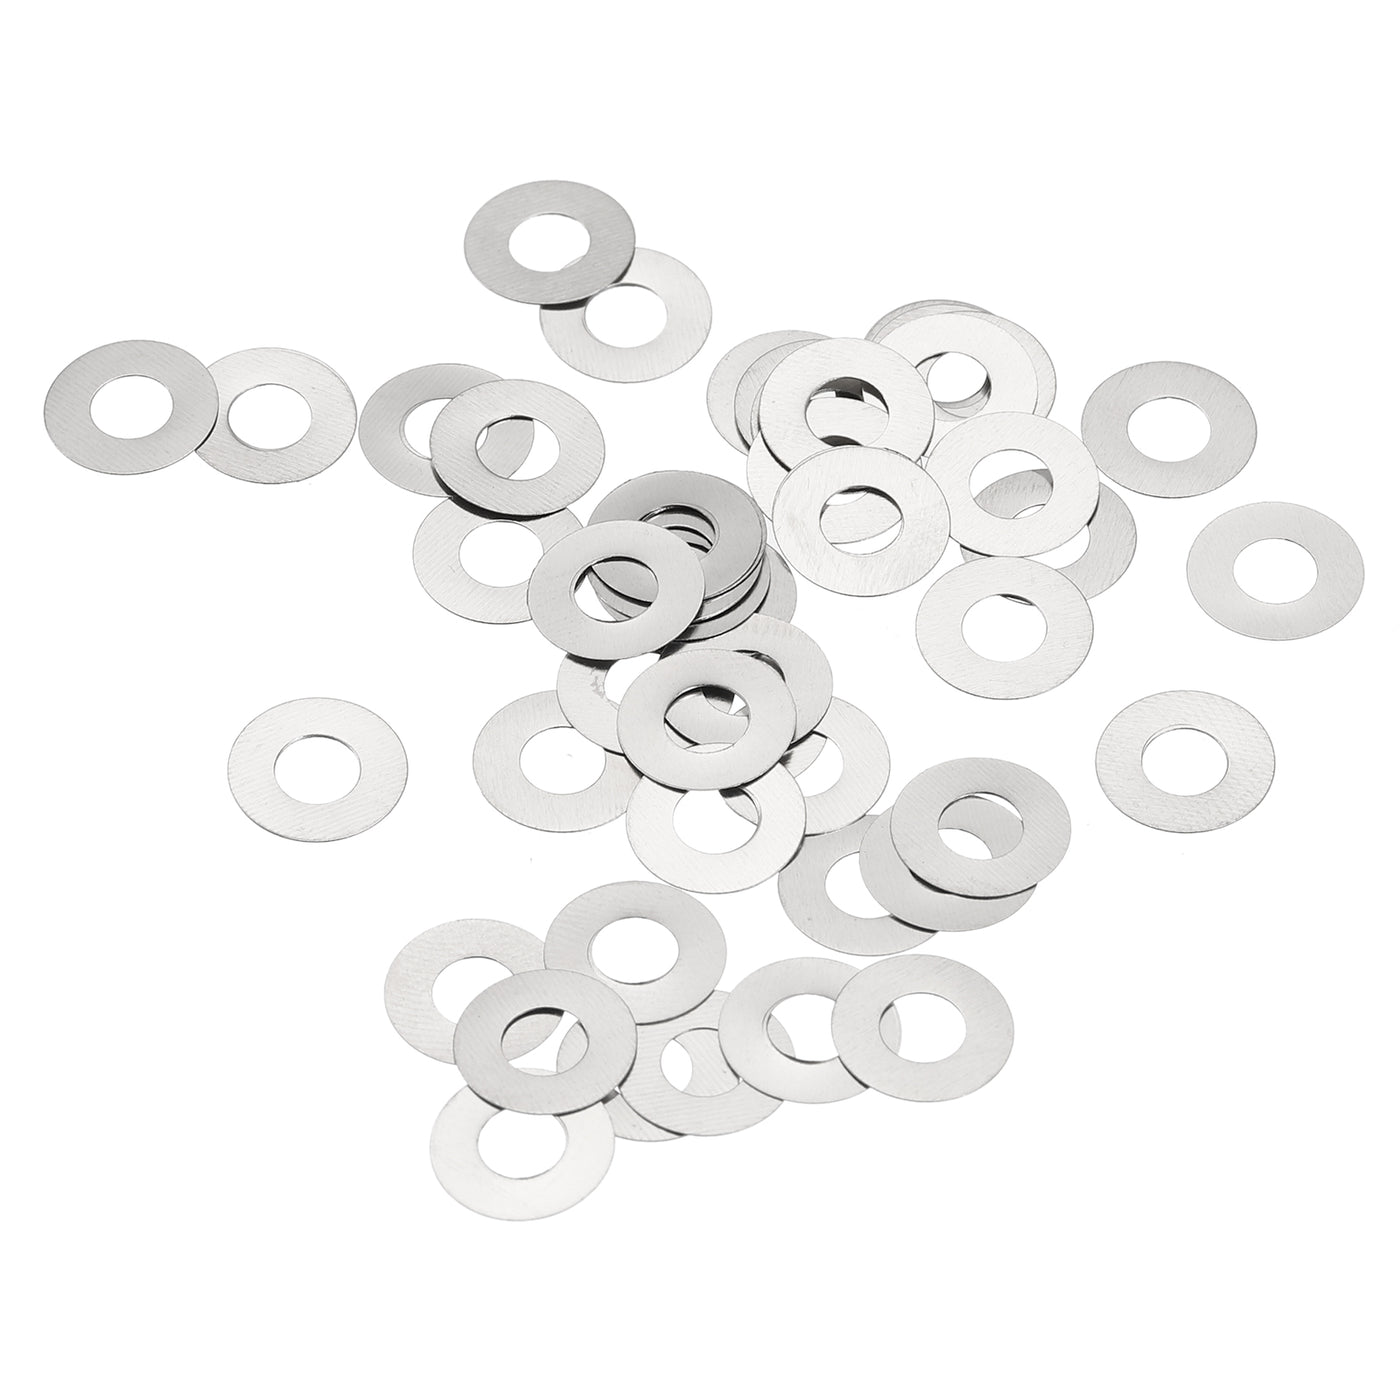 uxcell Uxcell M4 304 Stainless Steel Flat Washers, 100pcs 4x8x0.1mm Ultra Thin Flat Spacers